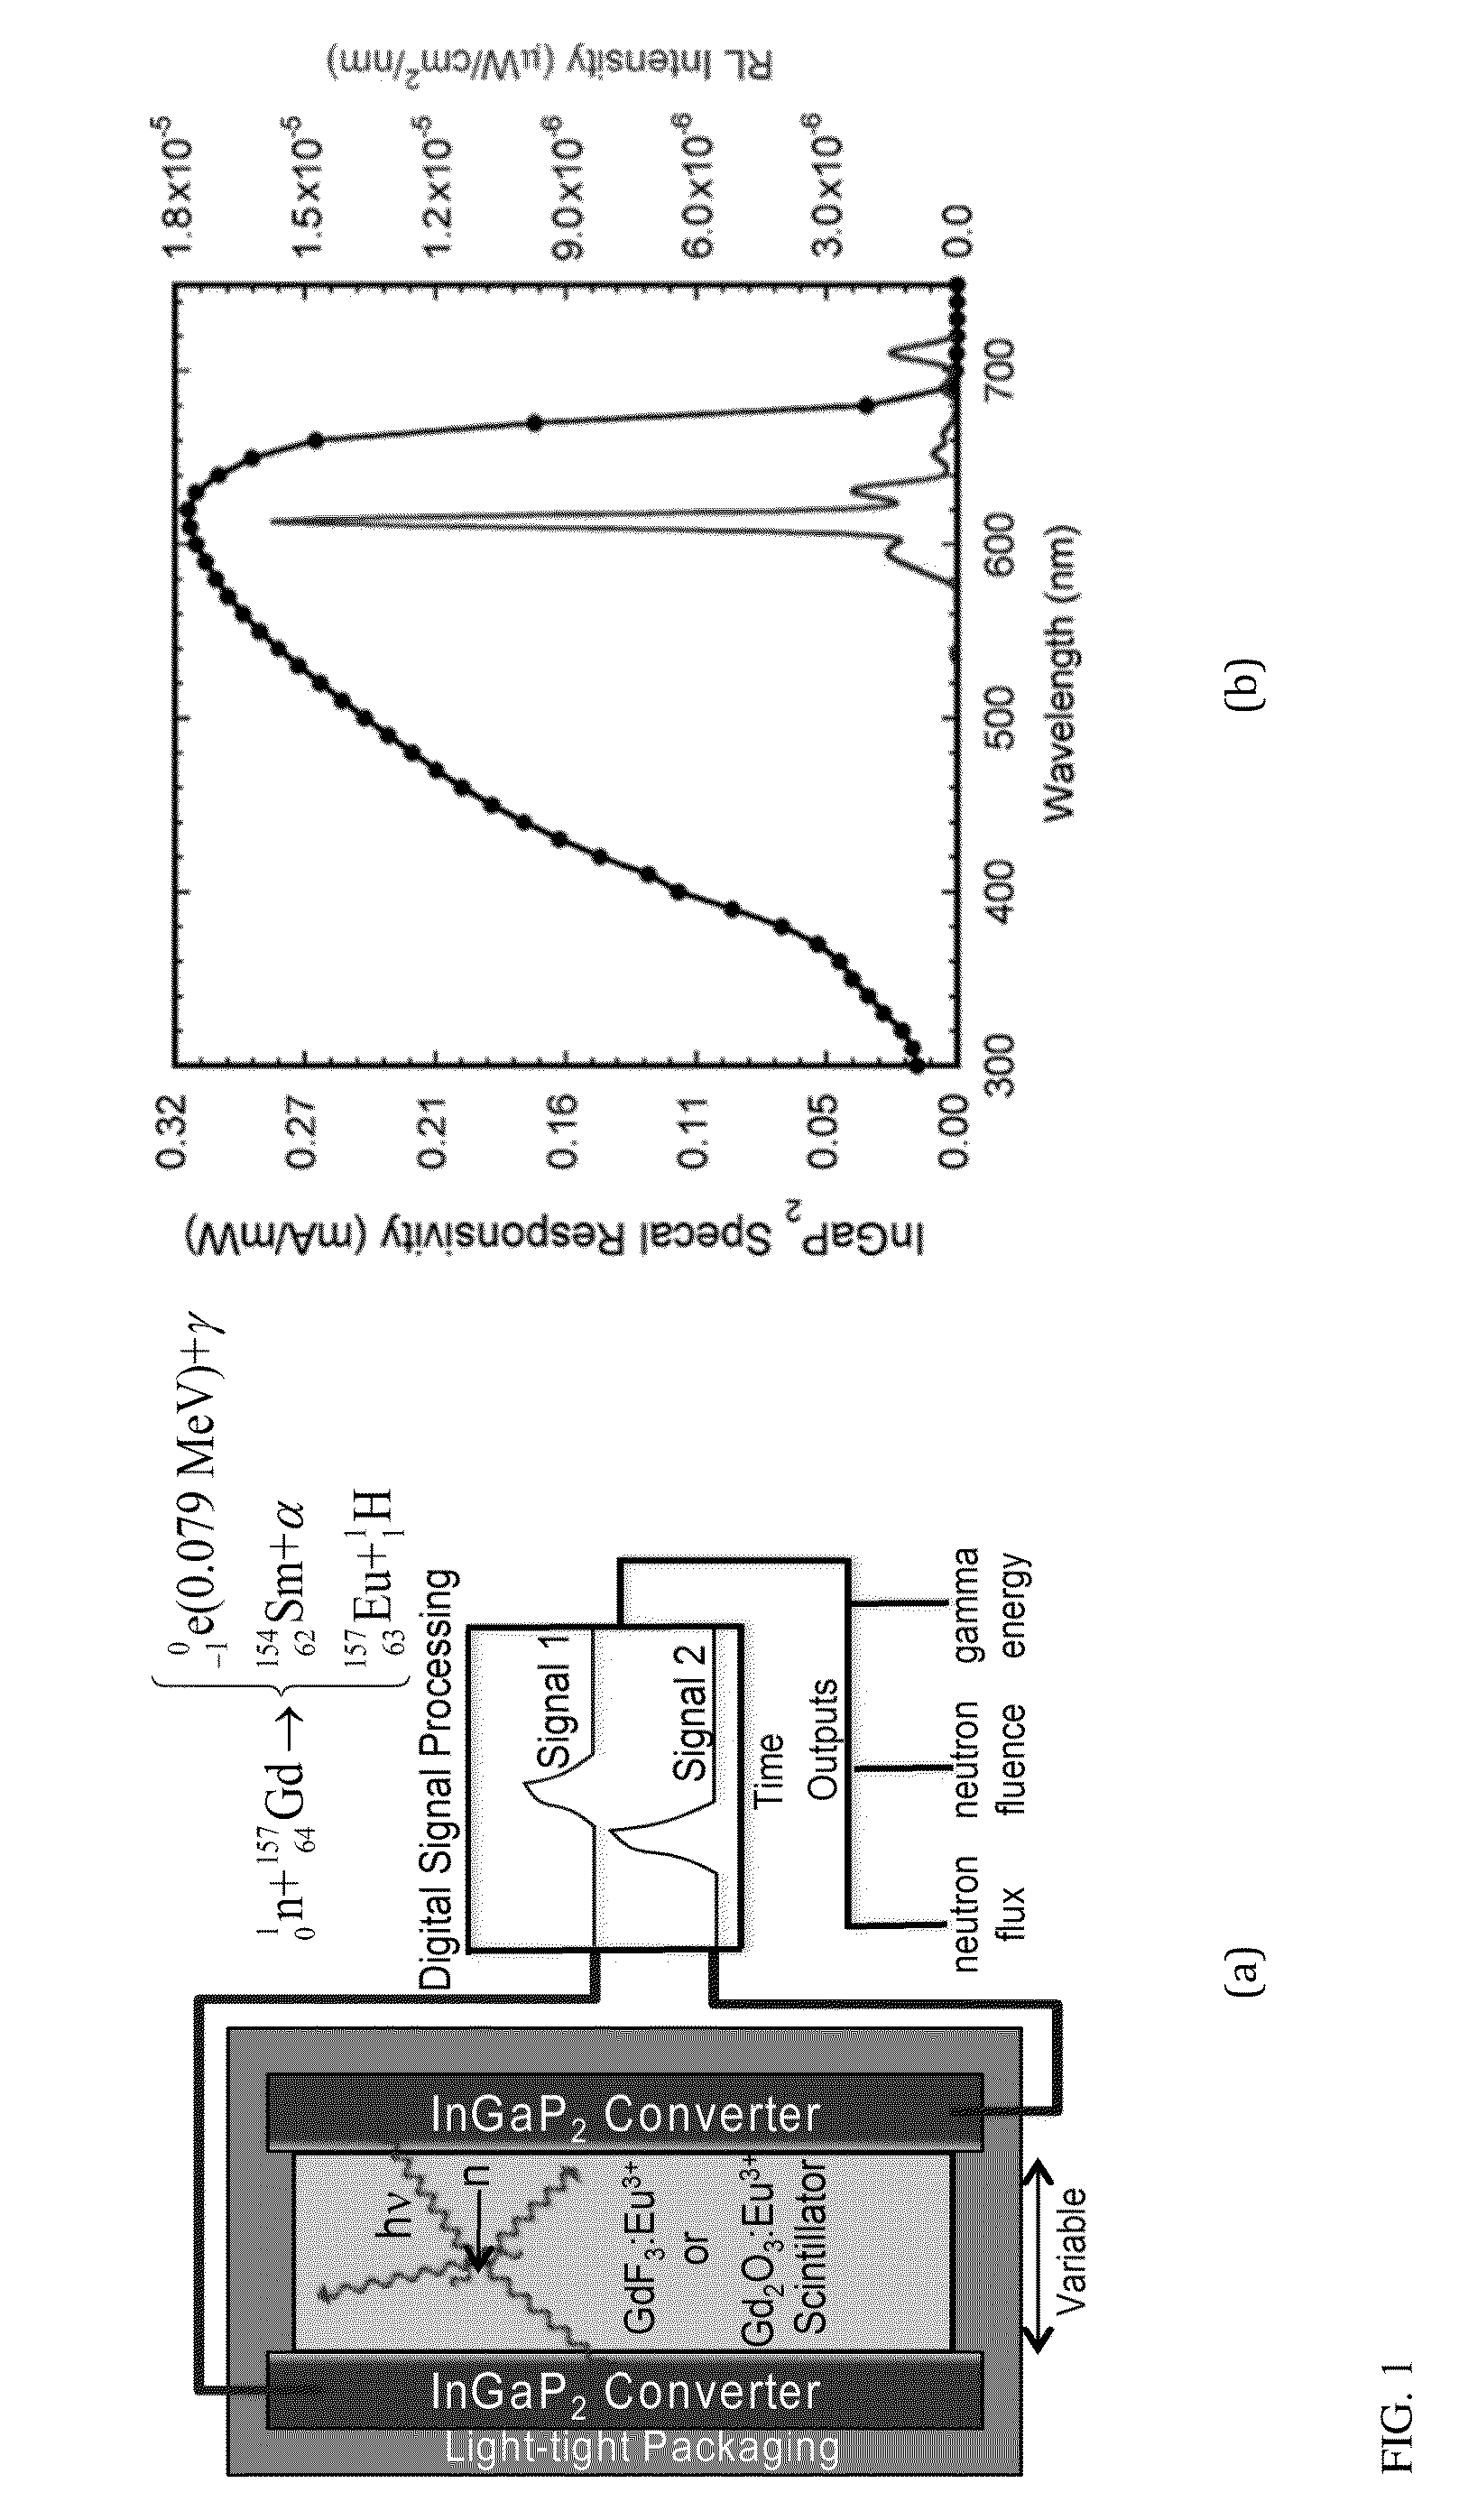 Neutron detector using gd-based scintillator and wide-bandgap semiconductor photovoltaic